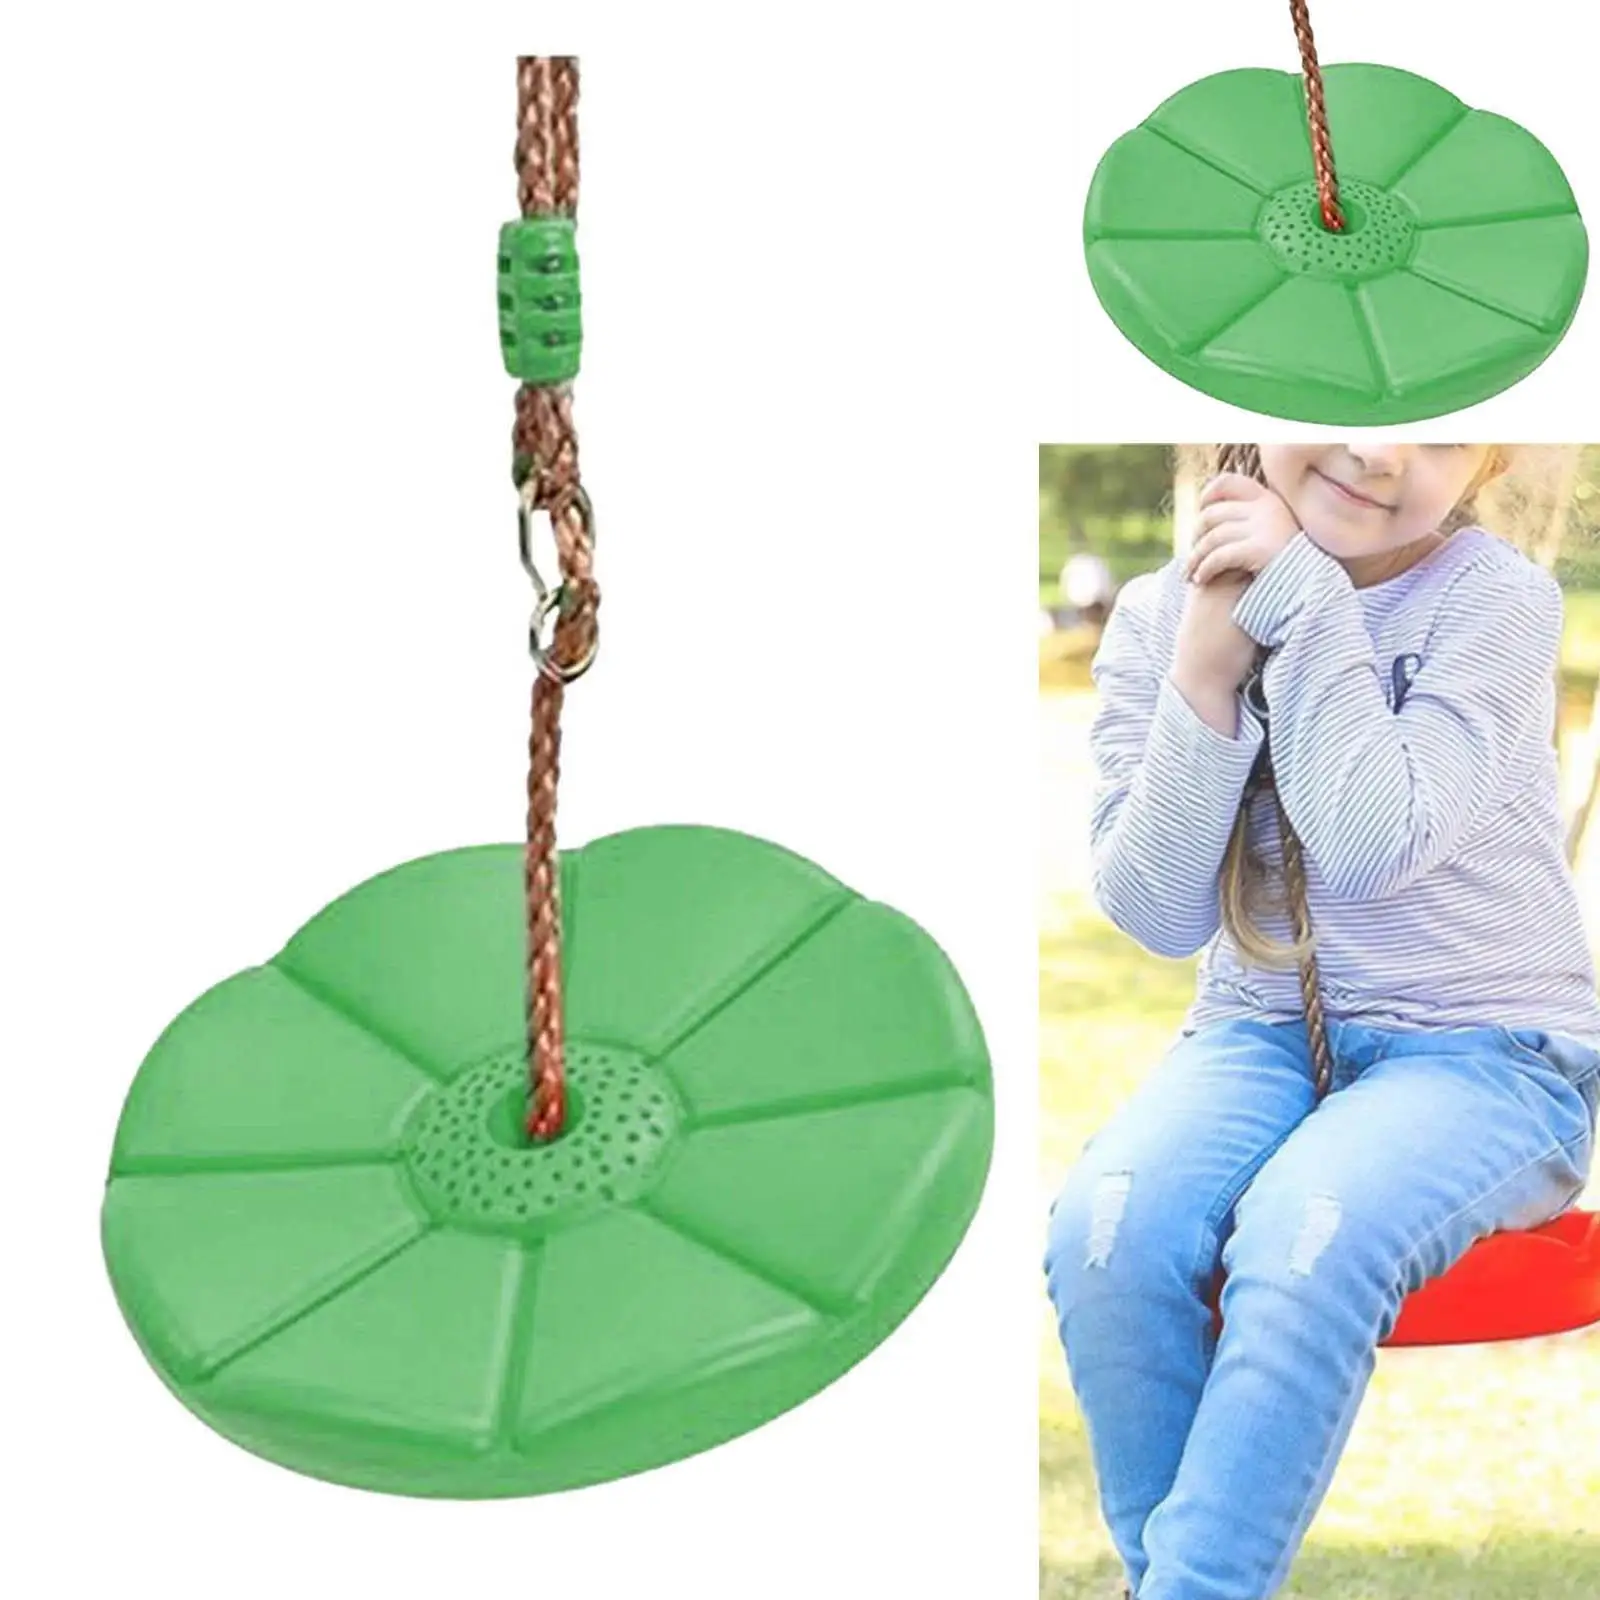  Swing  with Platforms,Disc  Seat,Outdoor Indoor Swings and Swing Set Accessories